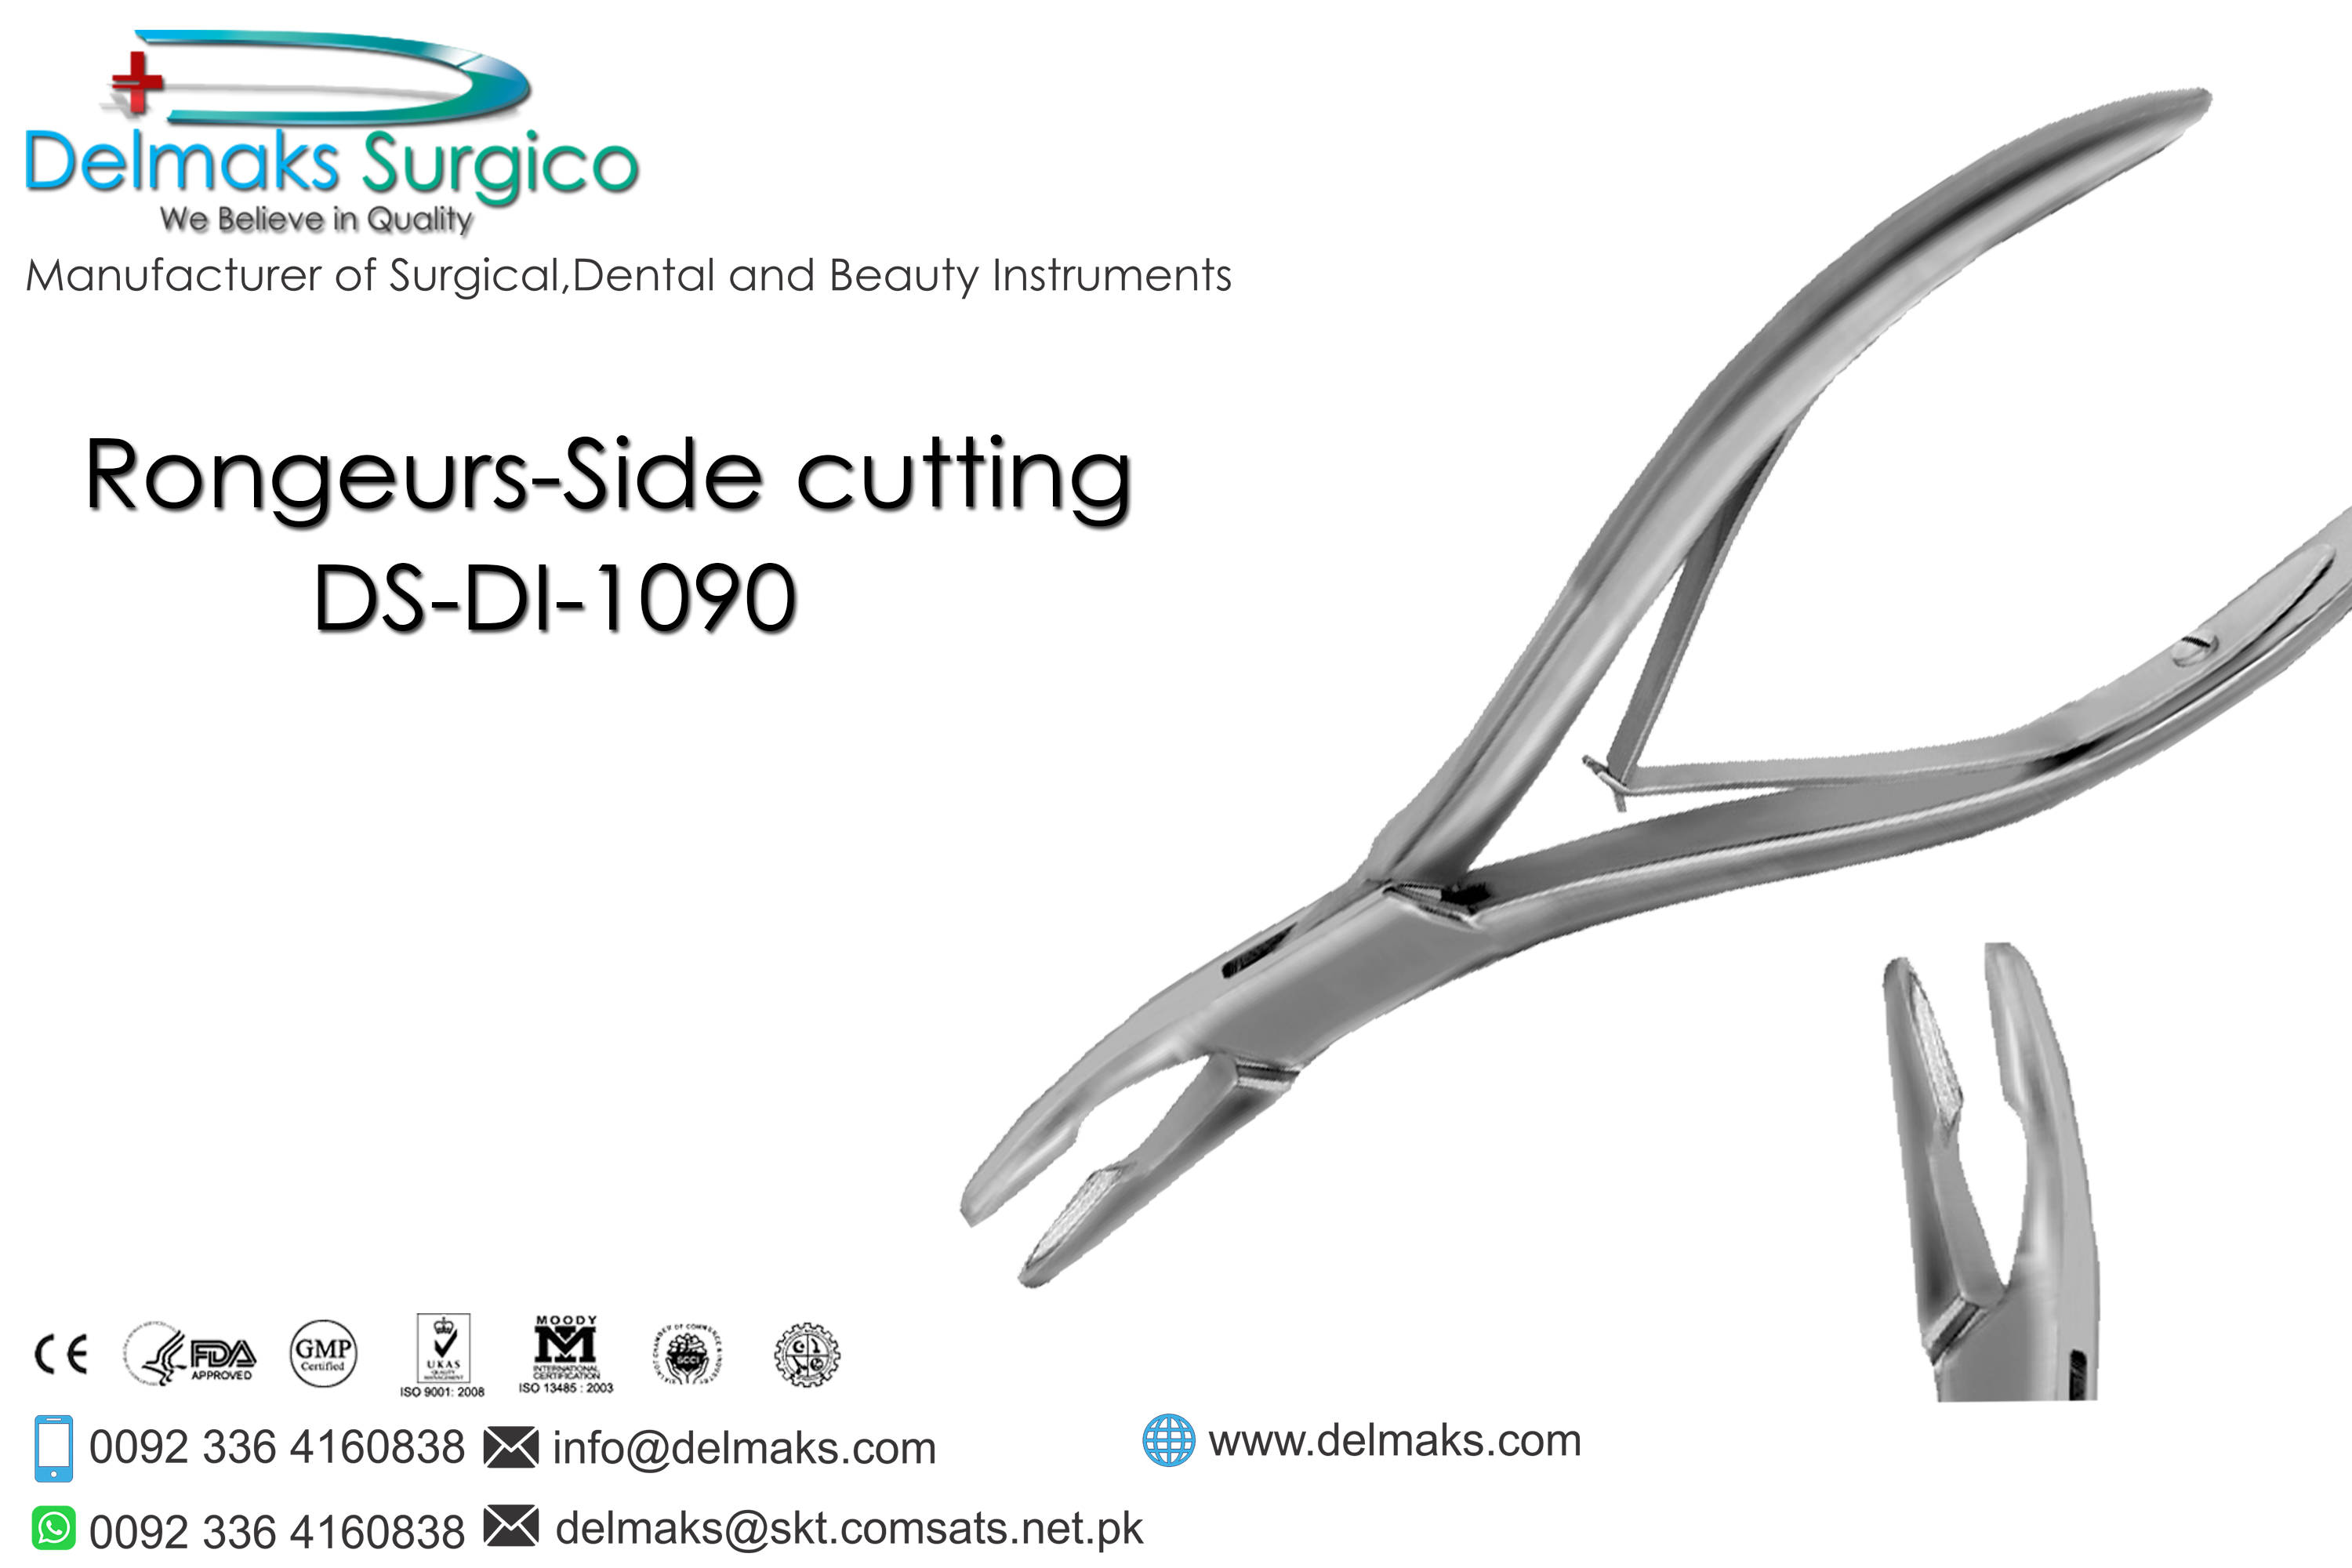 Rongeurs Side Cutting-Oral And Maxillofacial Surgery Instruments-Dental Instruments-Delmaks Surgico